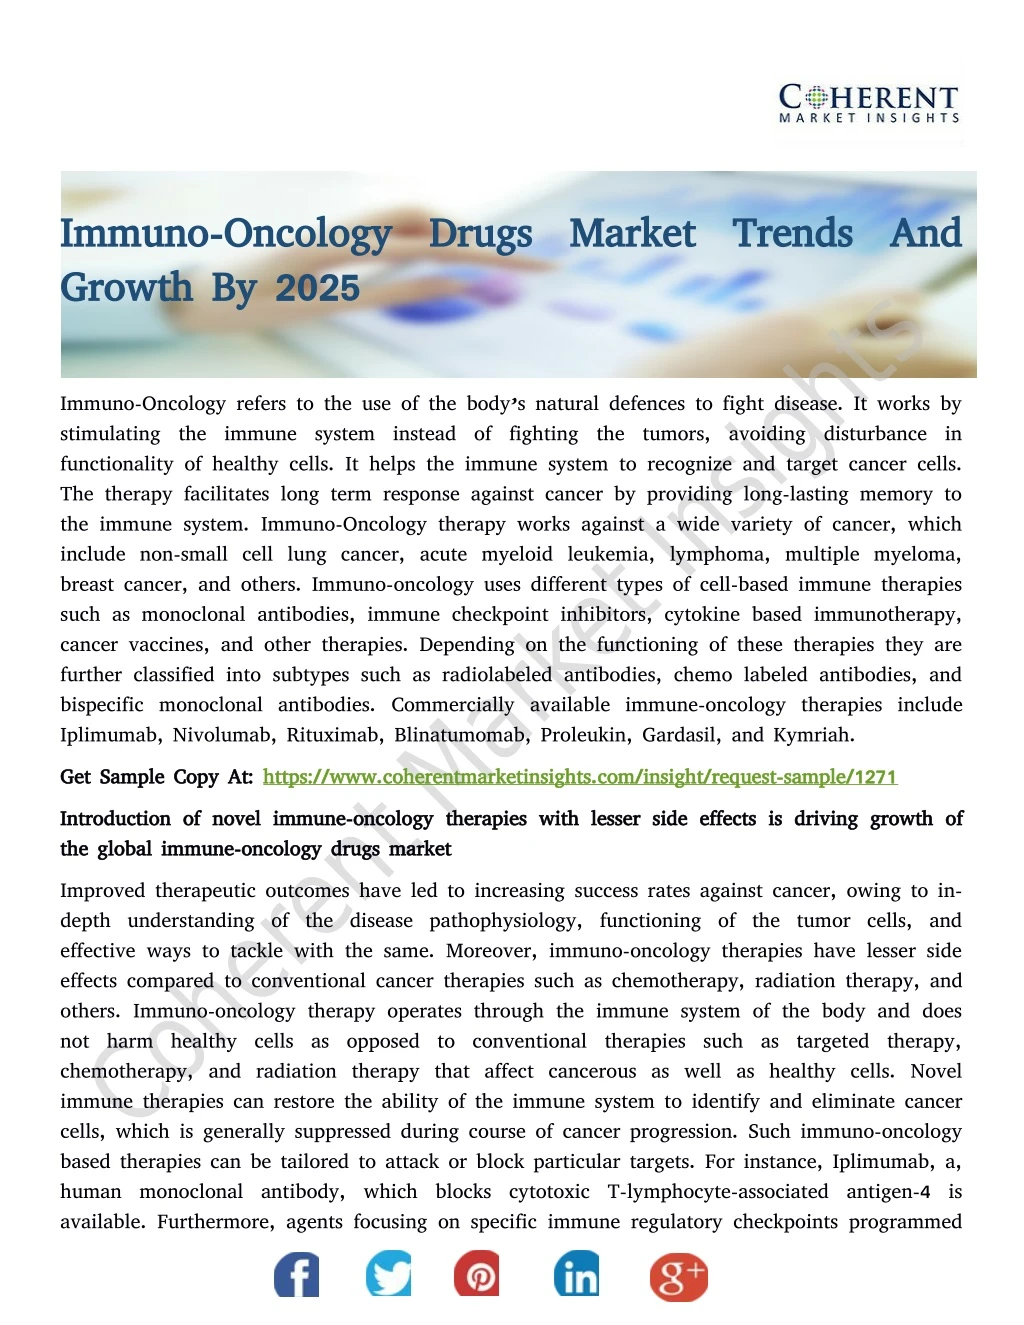 immuno oncology drugs market trends and immuno